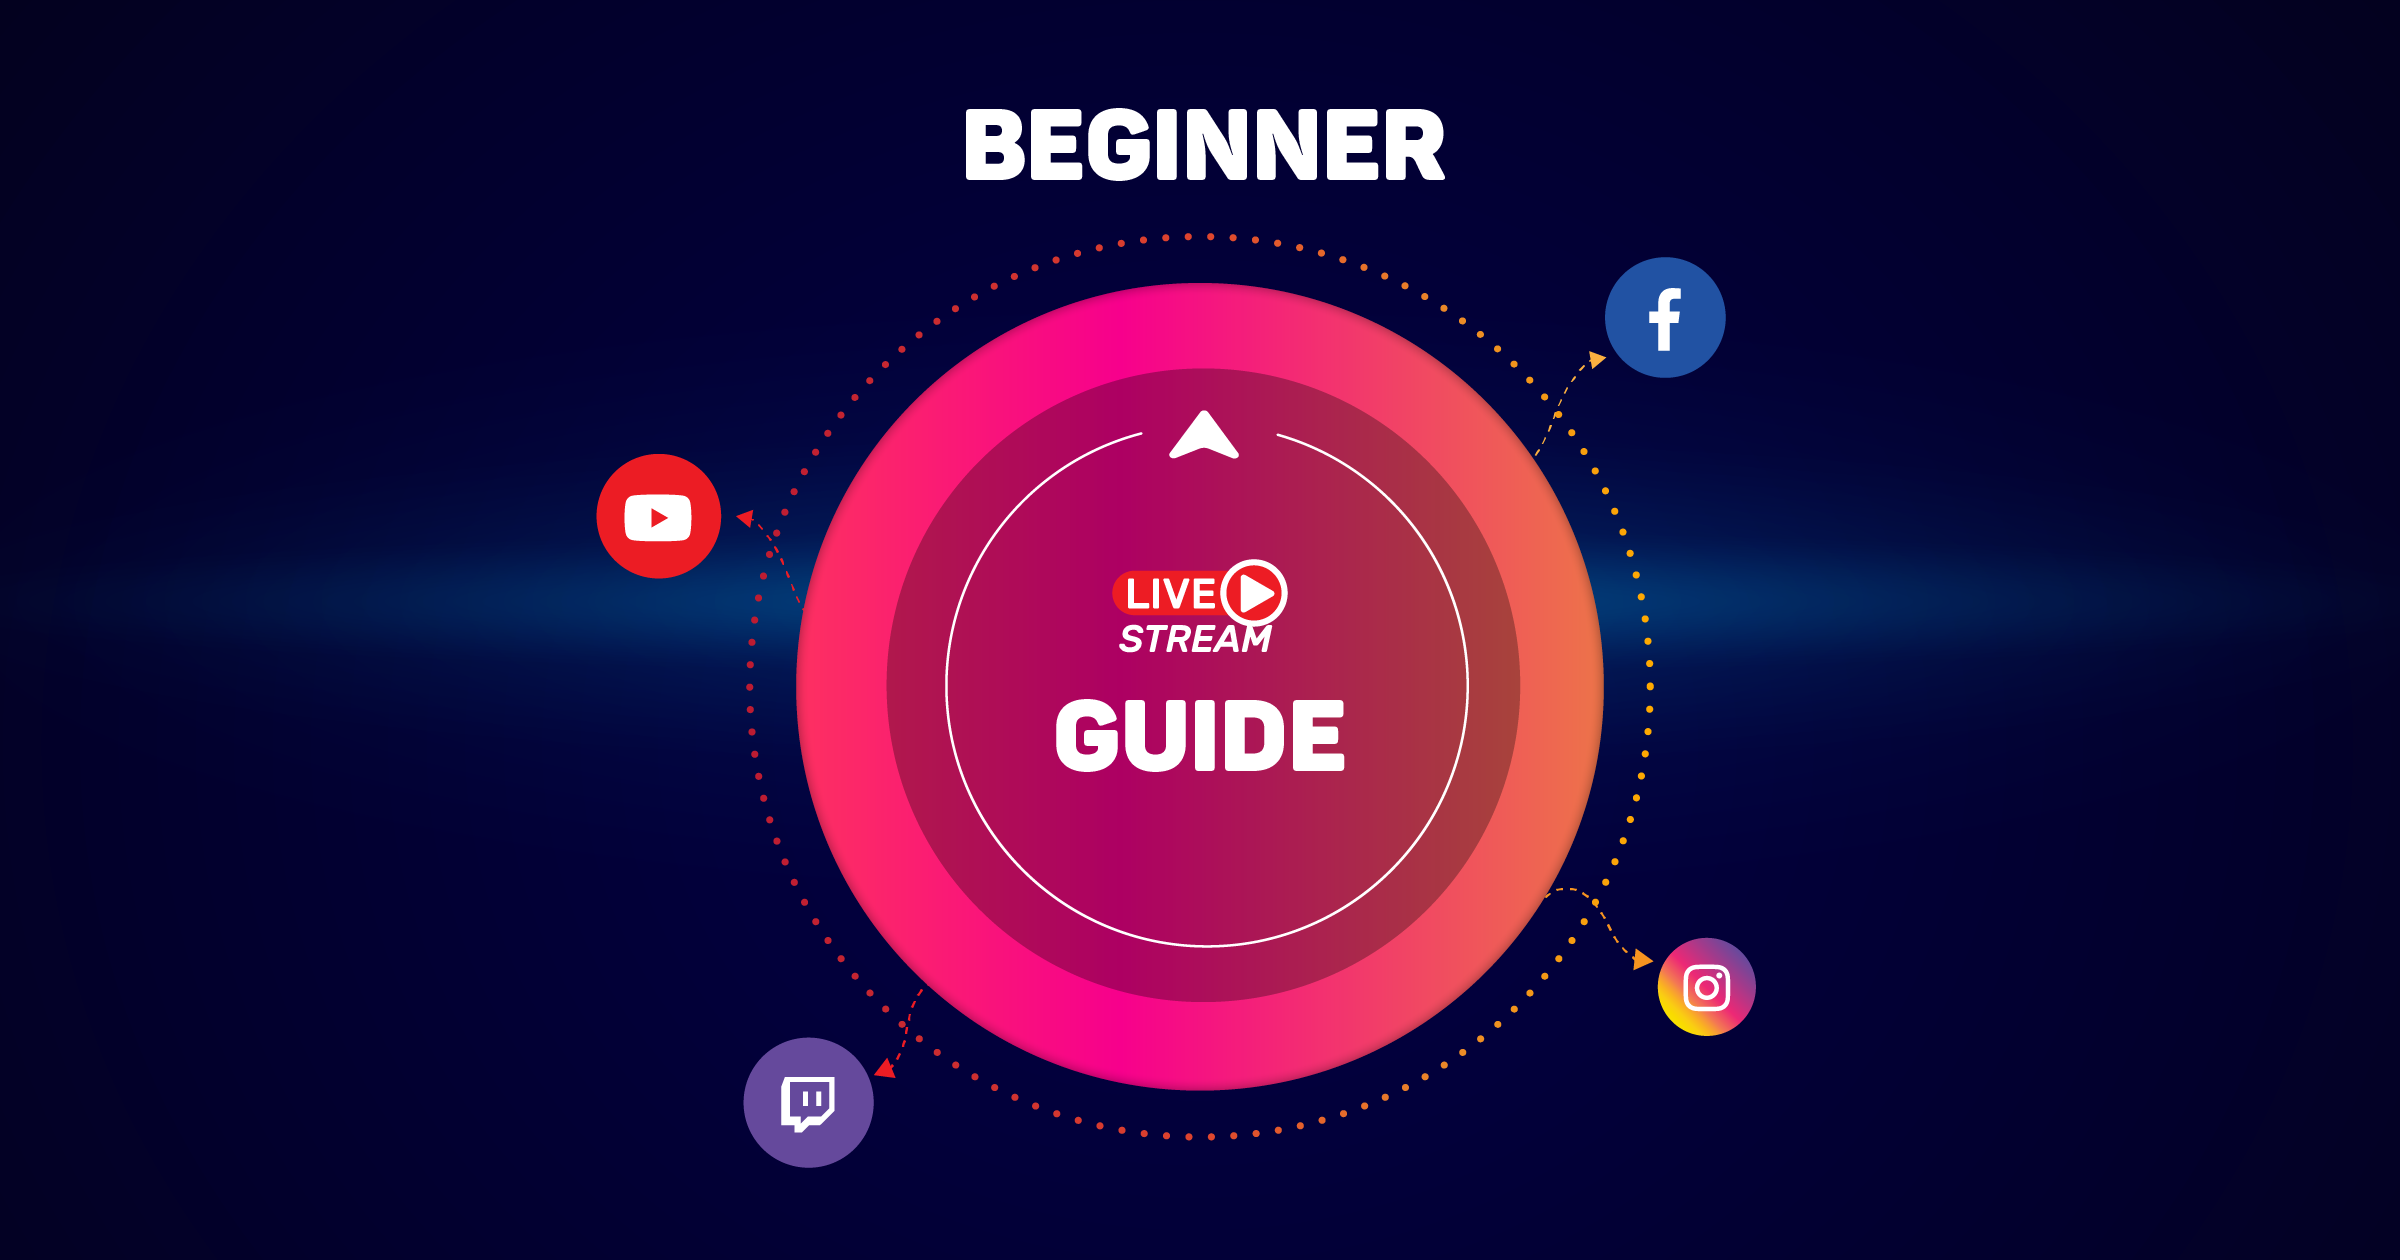 A Beginner’s Guide to Live Streaming